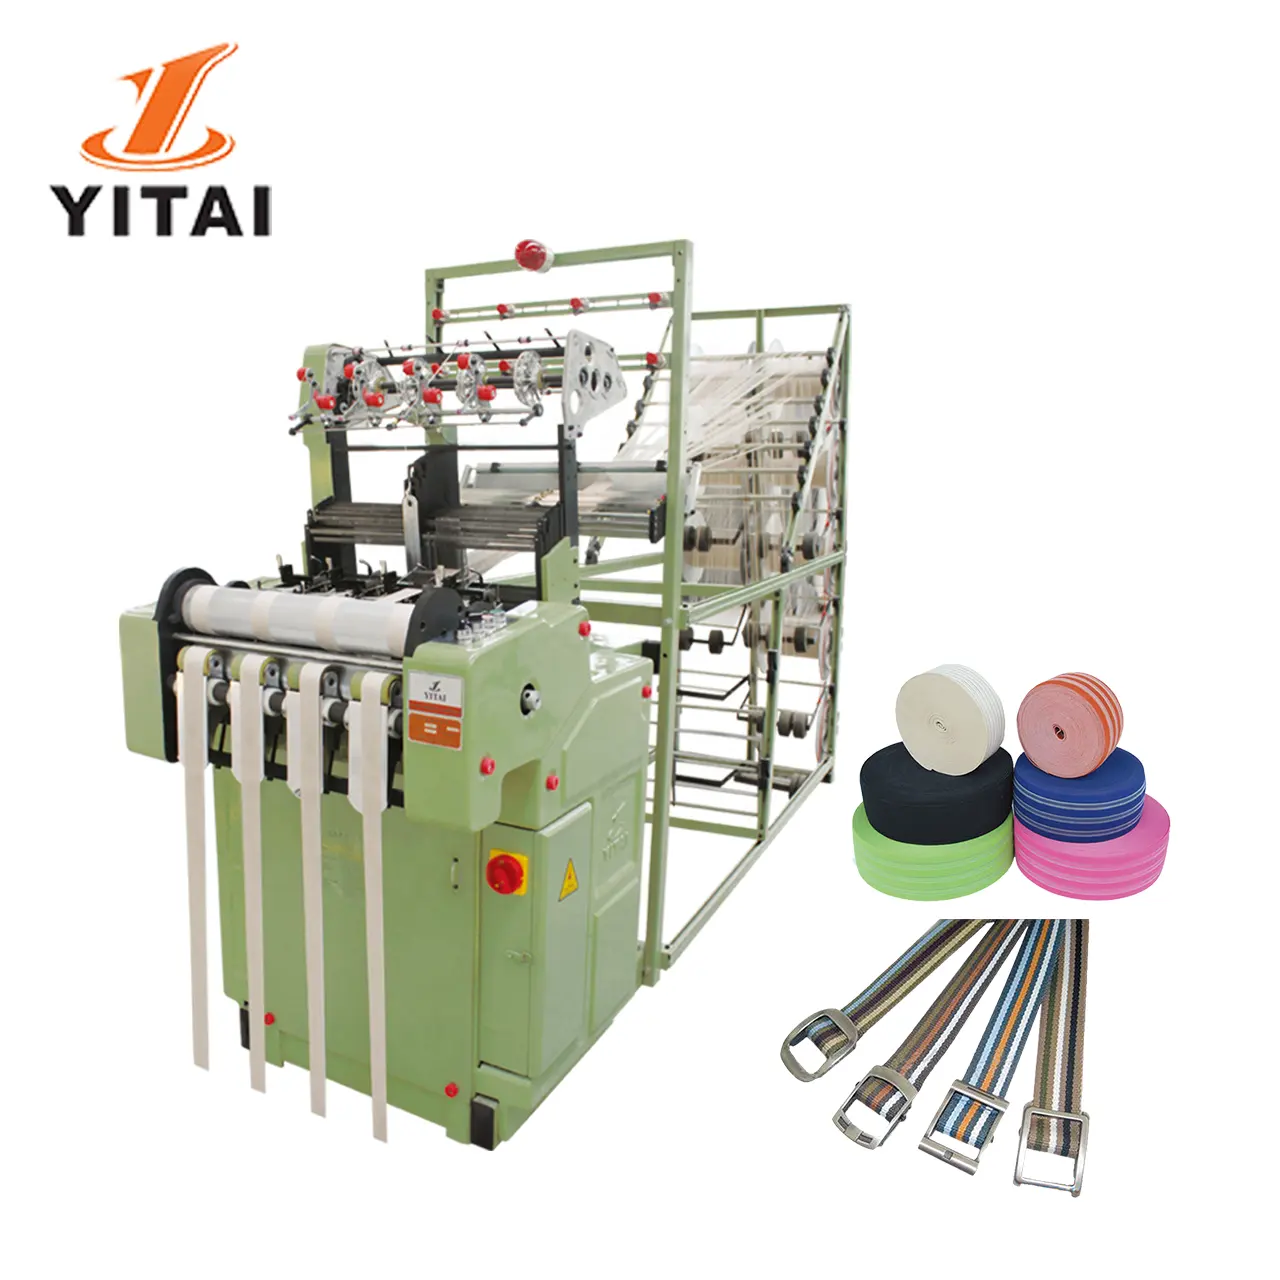 YITAI Narrow Fabric Band Weaving Tape Needle Looms Elastic Tape Making Machine for belt and straps